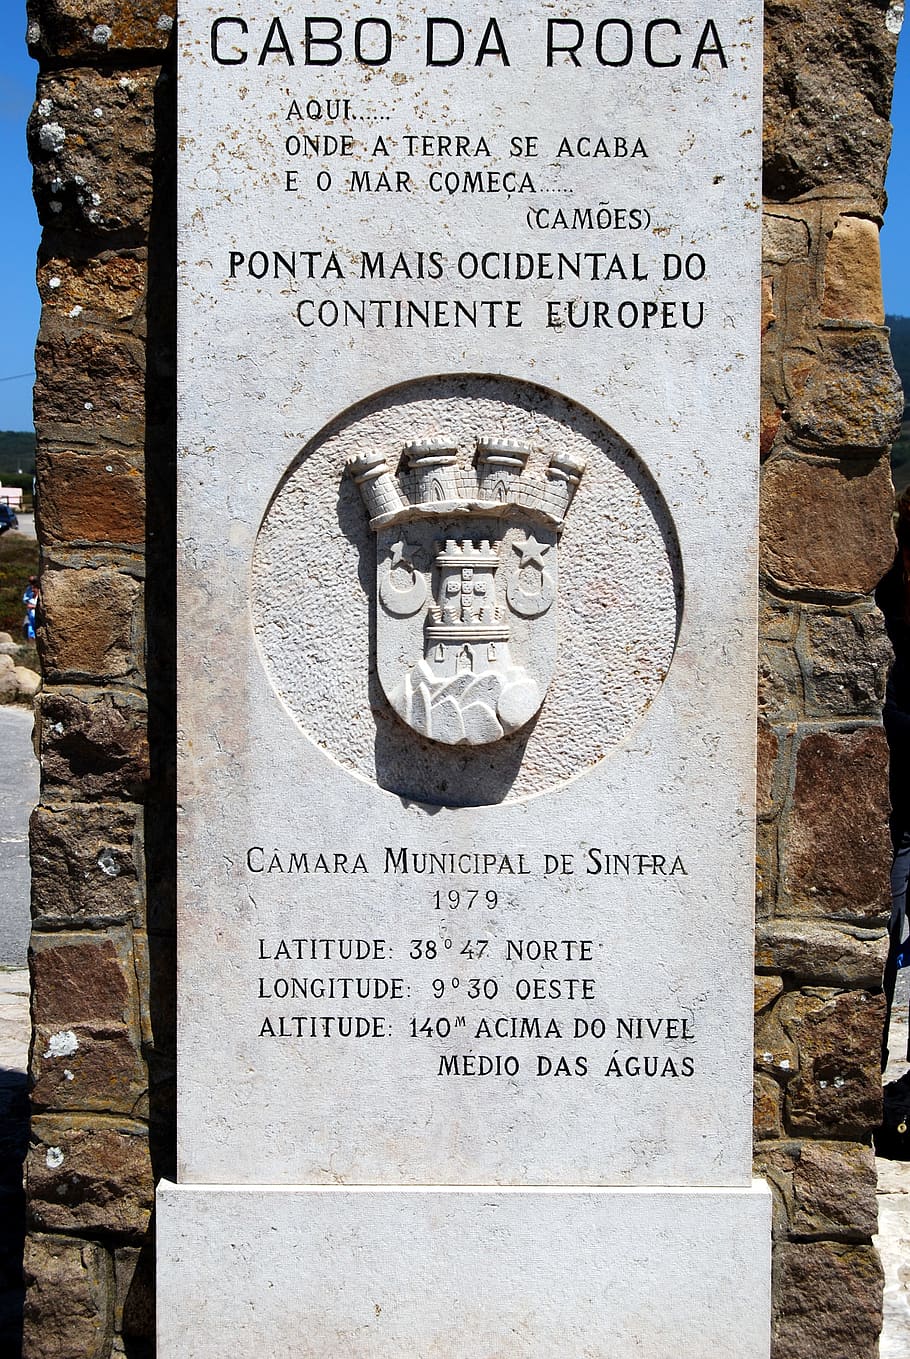 cabo da roca, monument, portugal, extreme, west, europe, atlantic ocean, text, craft, the past